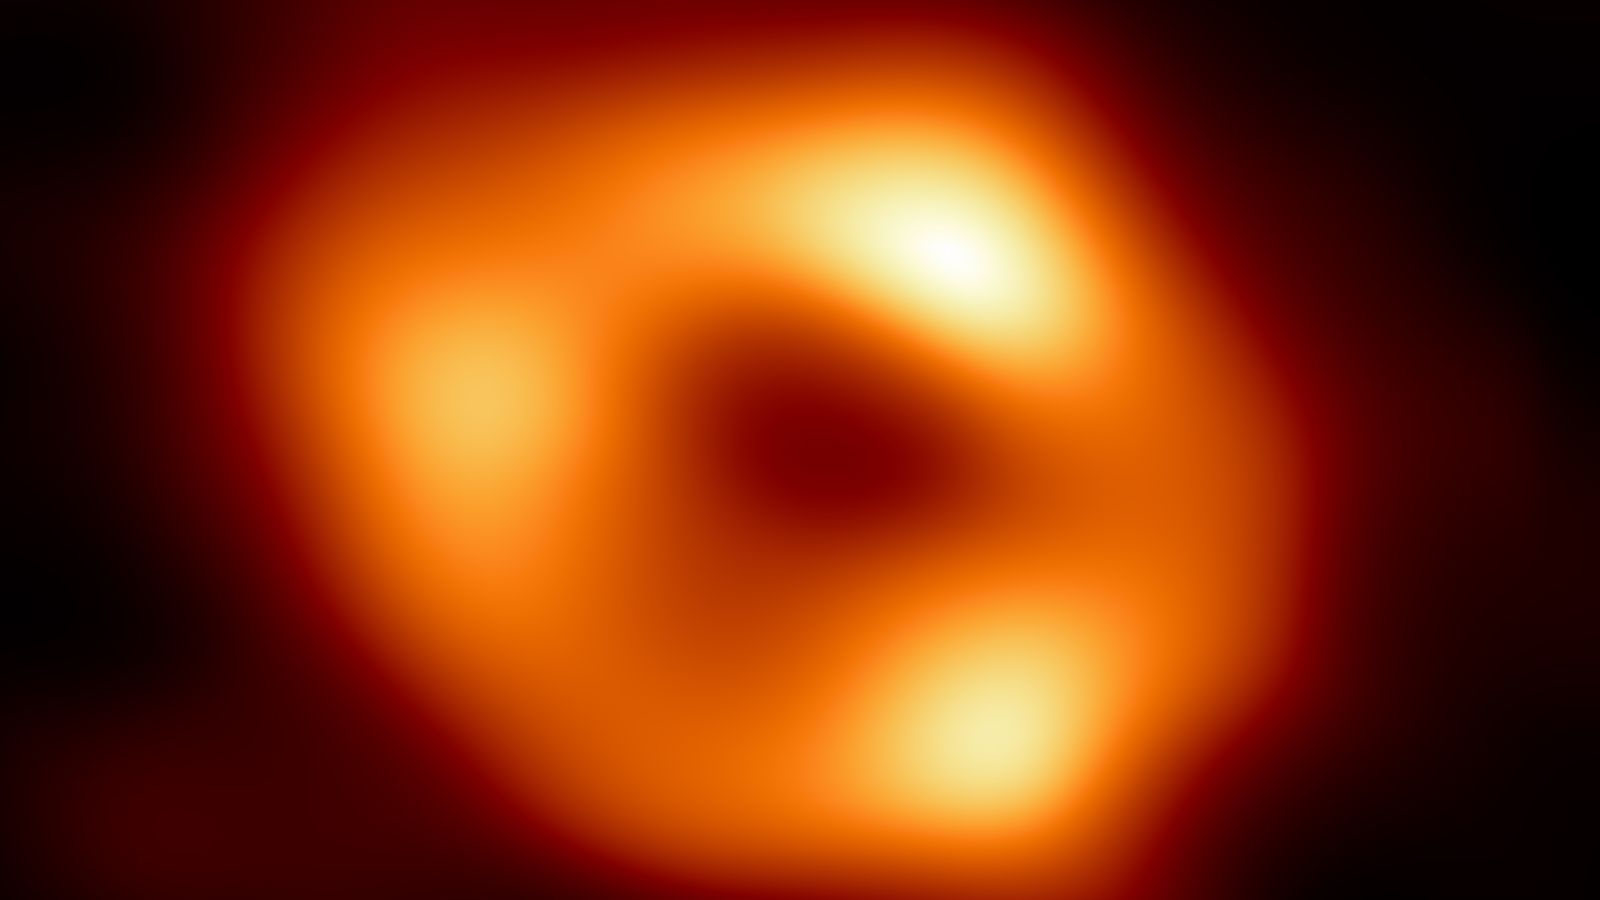 Astronomers capture first image of black hole at center of Milky Way